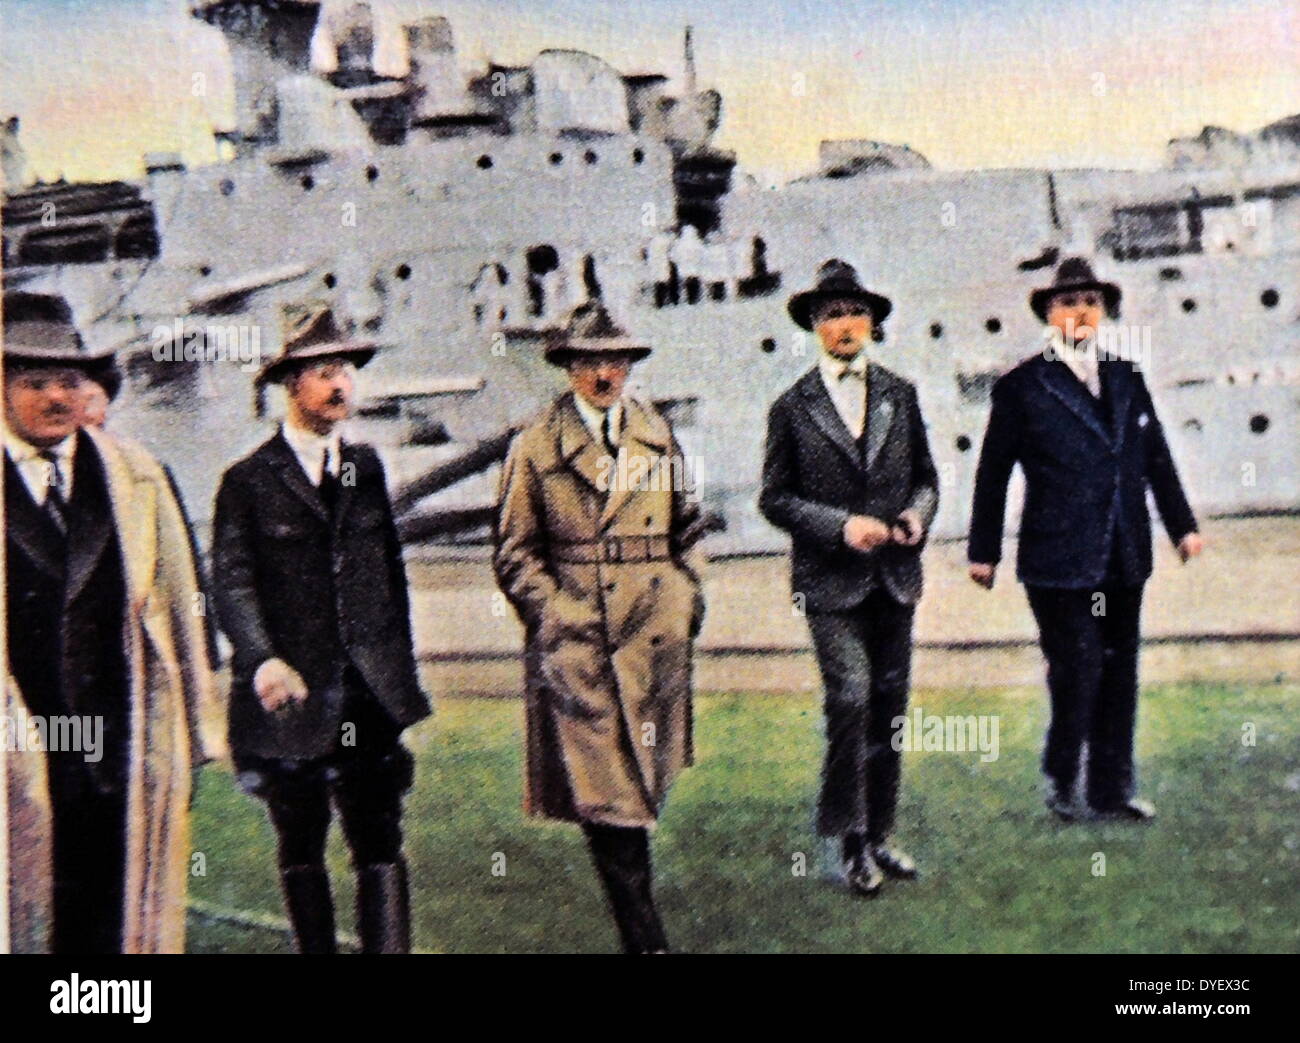 Adolf Hitler visits a German naval shipyard after becomming Chancellor in 1933. he is accompanied by heinrich himmler and rudolf Hess Stock Photo